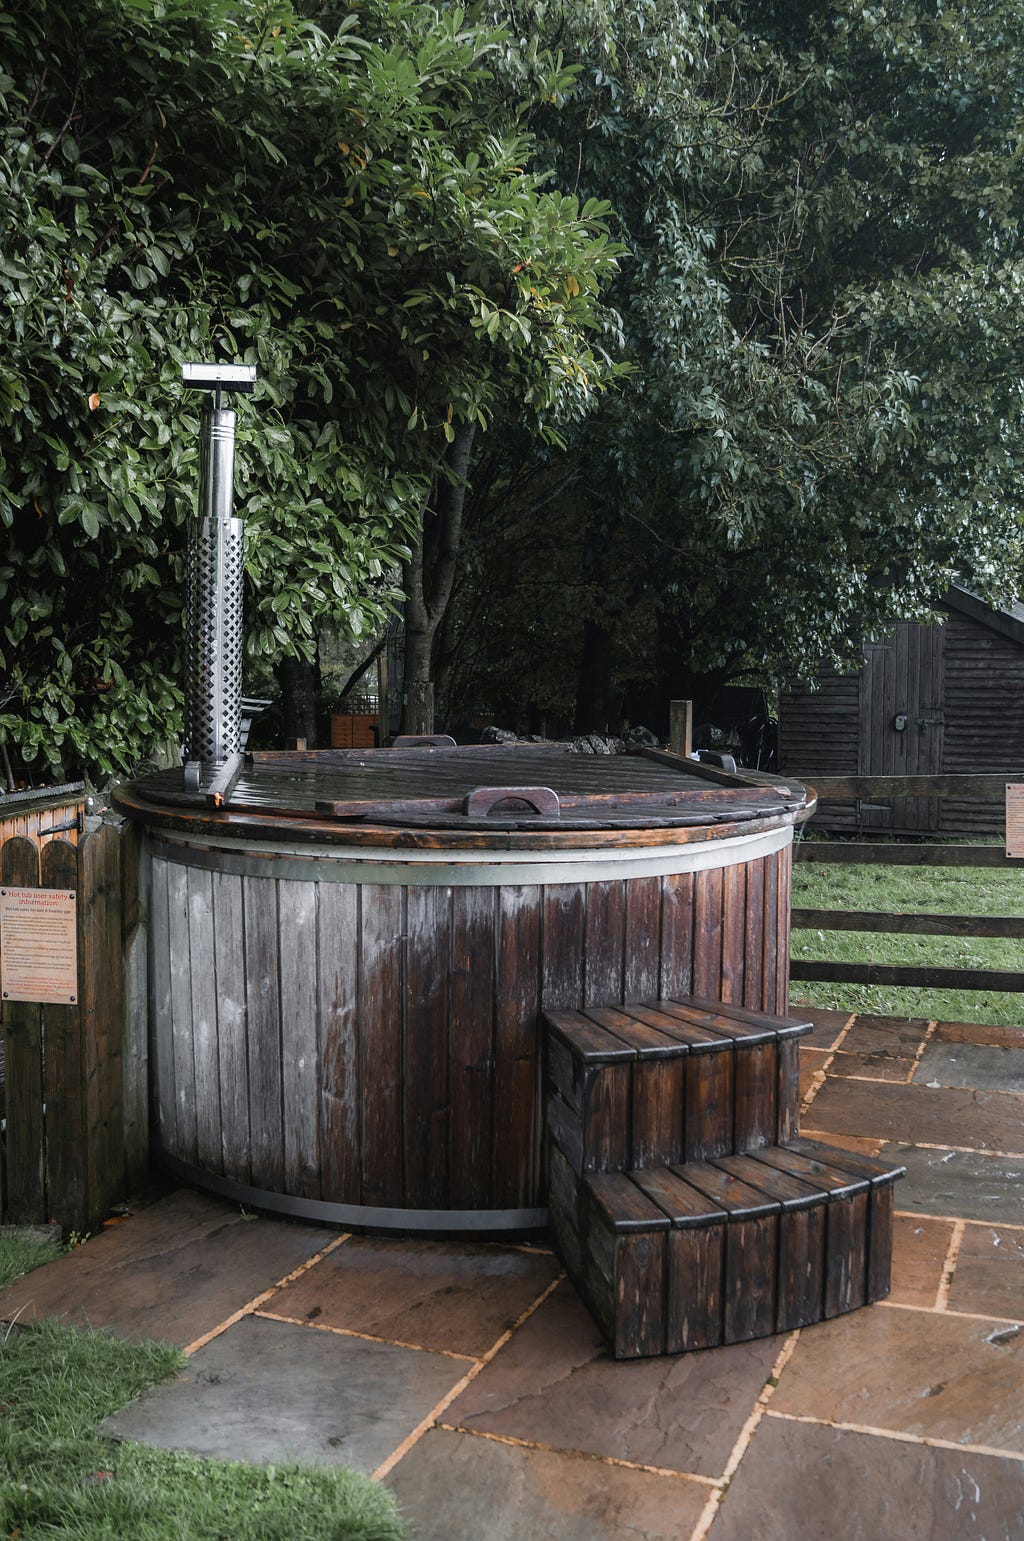 An outdoor wooden hot tub with trees and grass on the background.